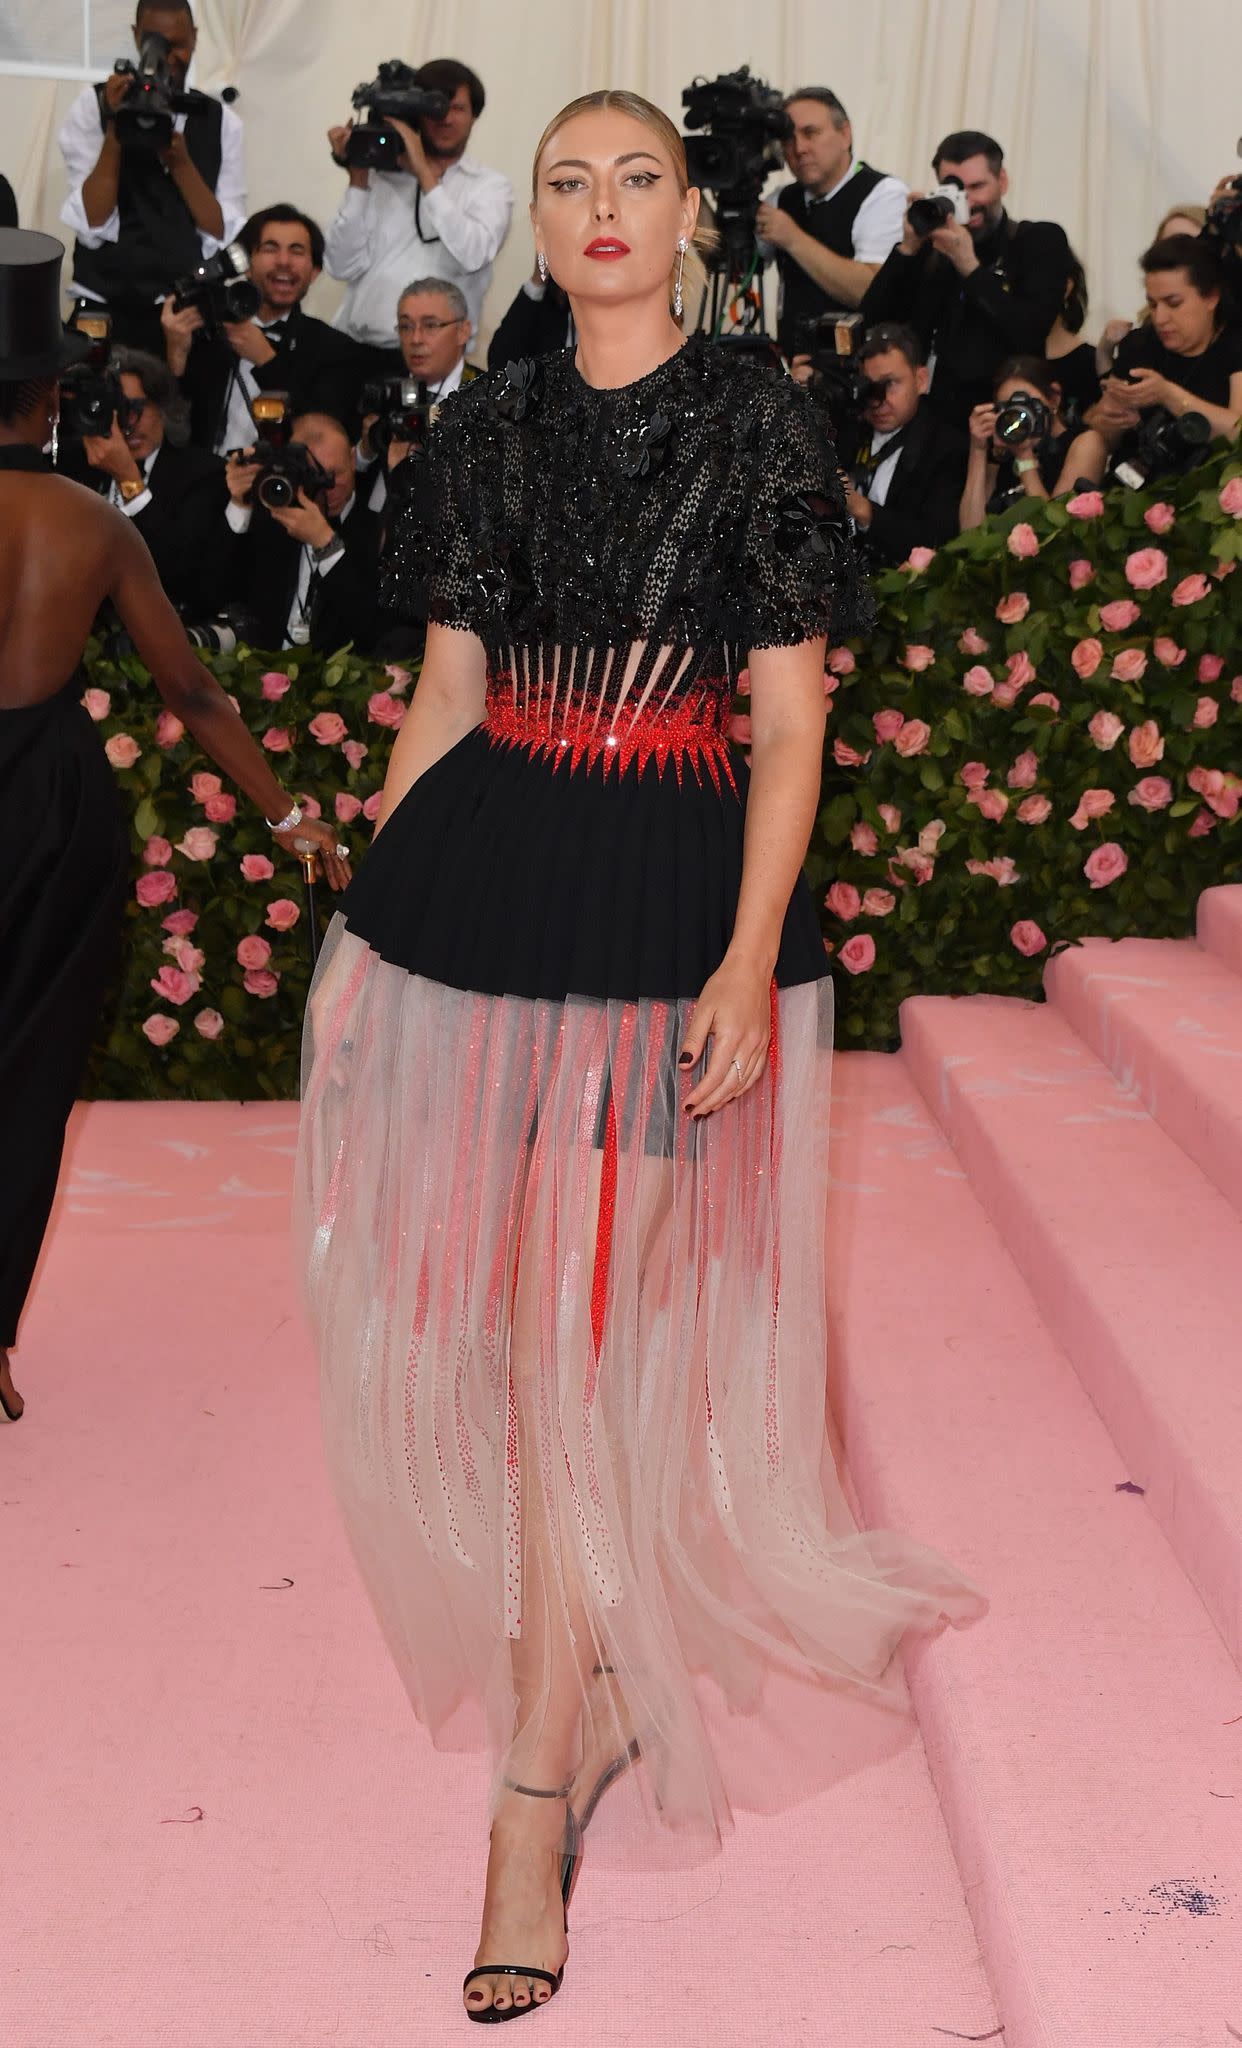 Maria Sharapova arrives for the 2019 Met Gala at the Metropolitan Museum of Art on May 6, 2019, in New York. - The Gala raises money for the Metropolitan Museum of Arts Costume Institute. The Gala's 2019 theme is Camp: Notes on Fashion" inspired by Susan Sontag's 1964 essay "Notes on Camp".